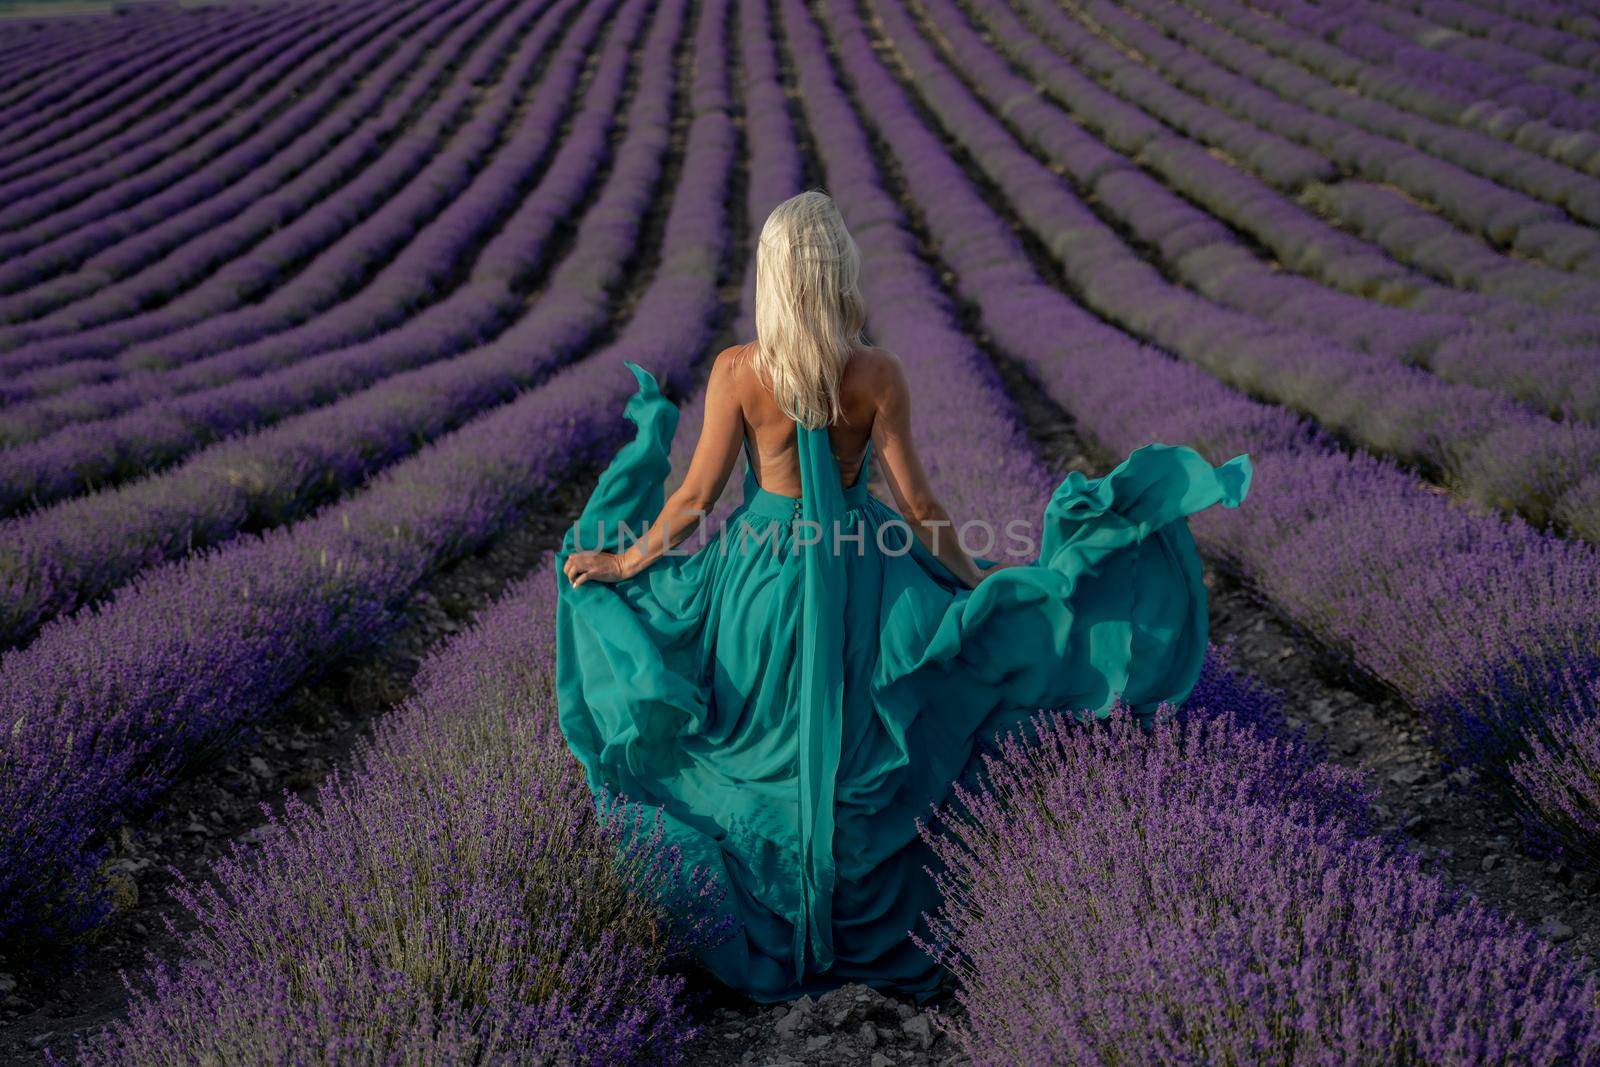 A woman with long blonde hair in a light green dress is walking through a lavender field alone waving a lavender dress. by Matiunina